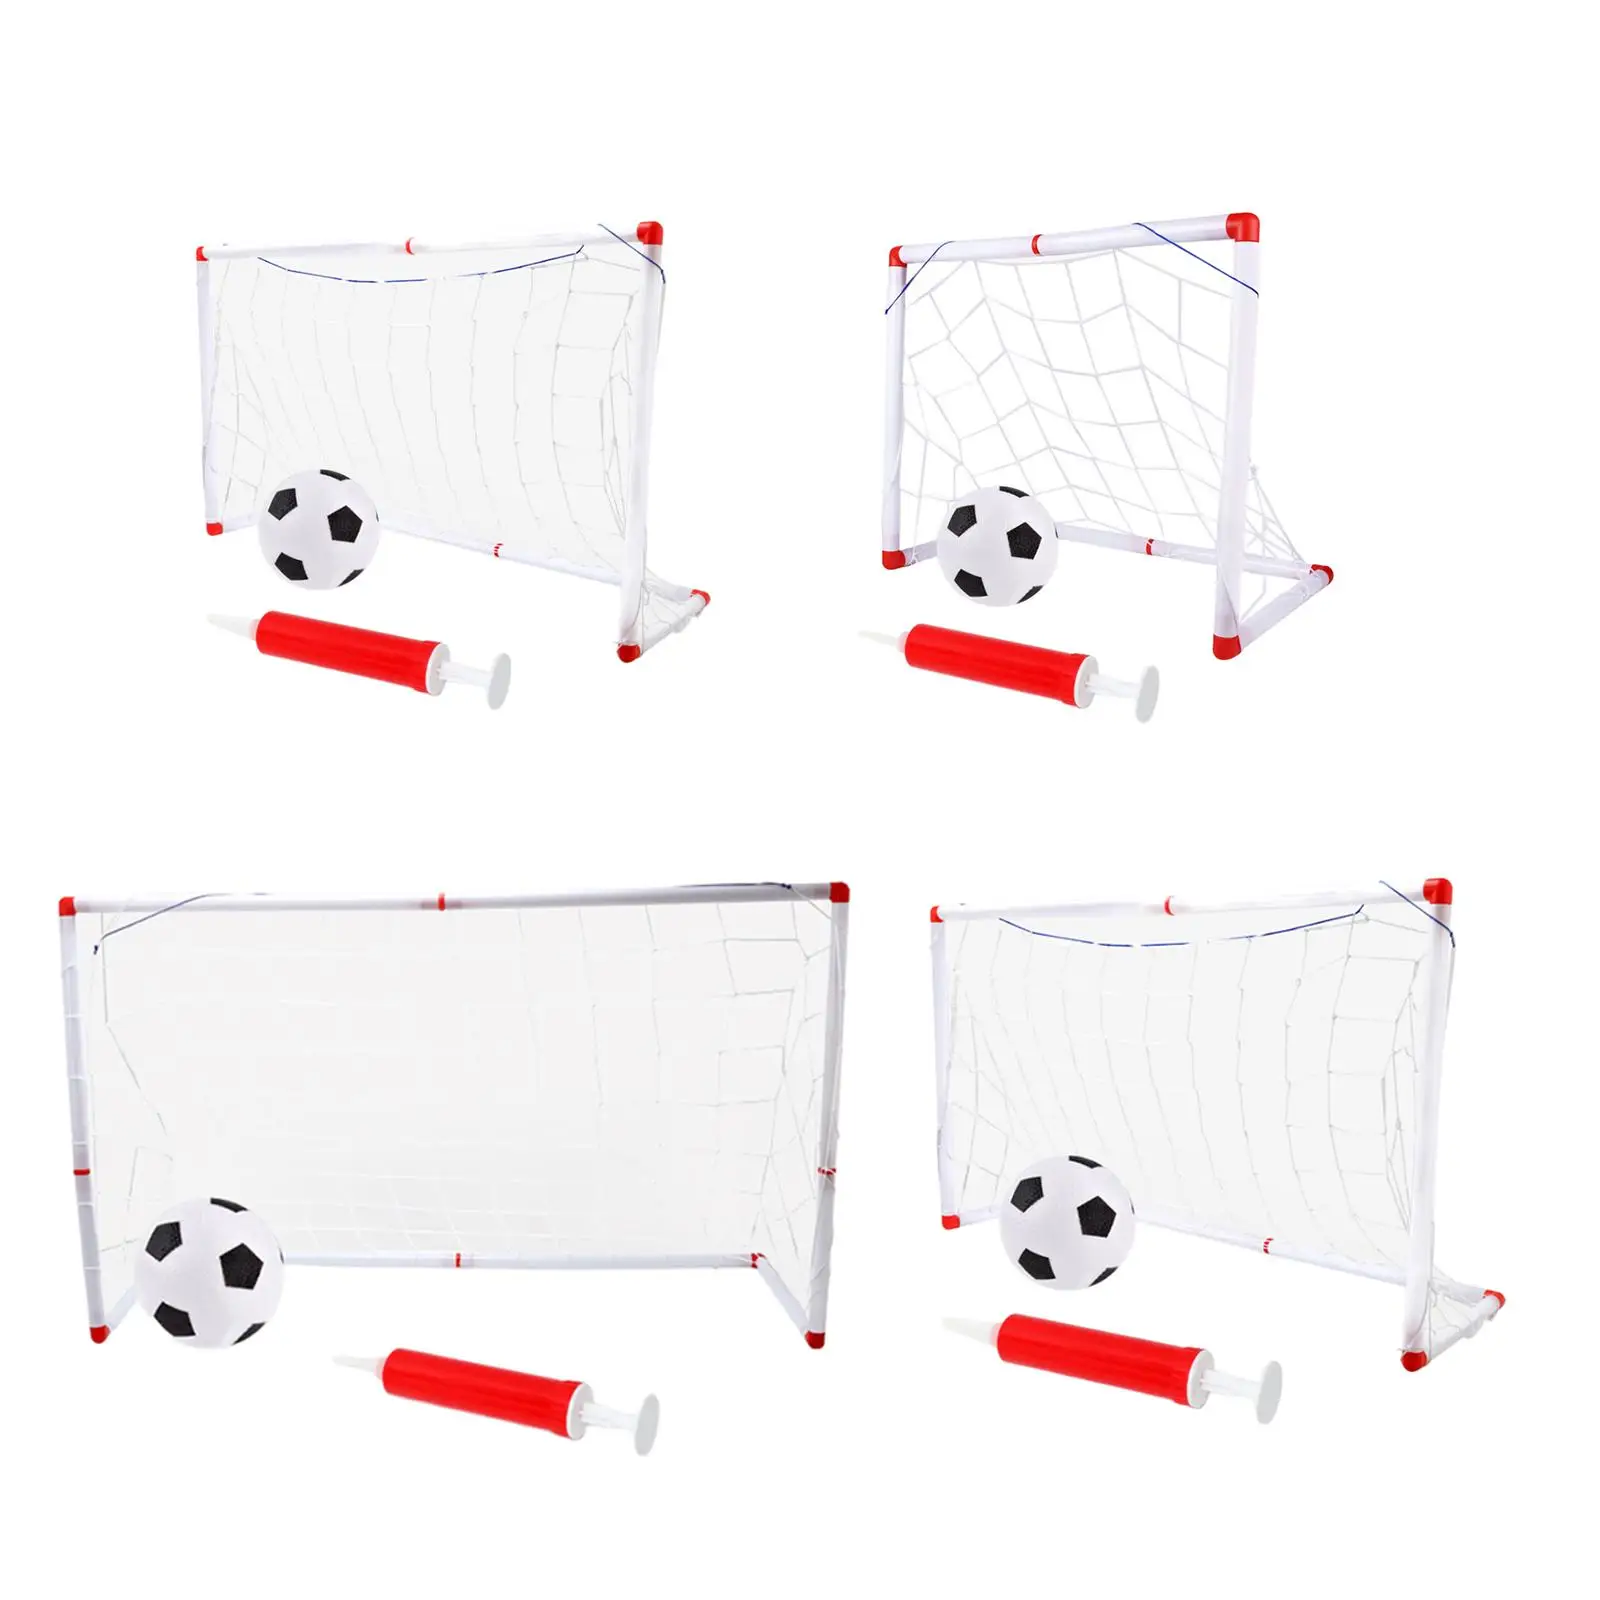 Soccer Football Goal Post Sports Toys Learn to Play Mini Training Practice Set for Boys and Girls, Ball, and Pump Included